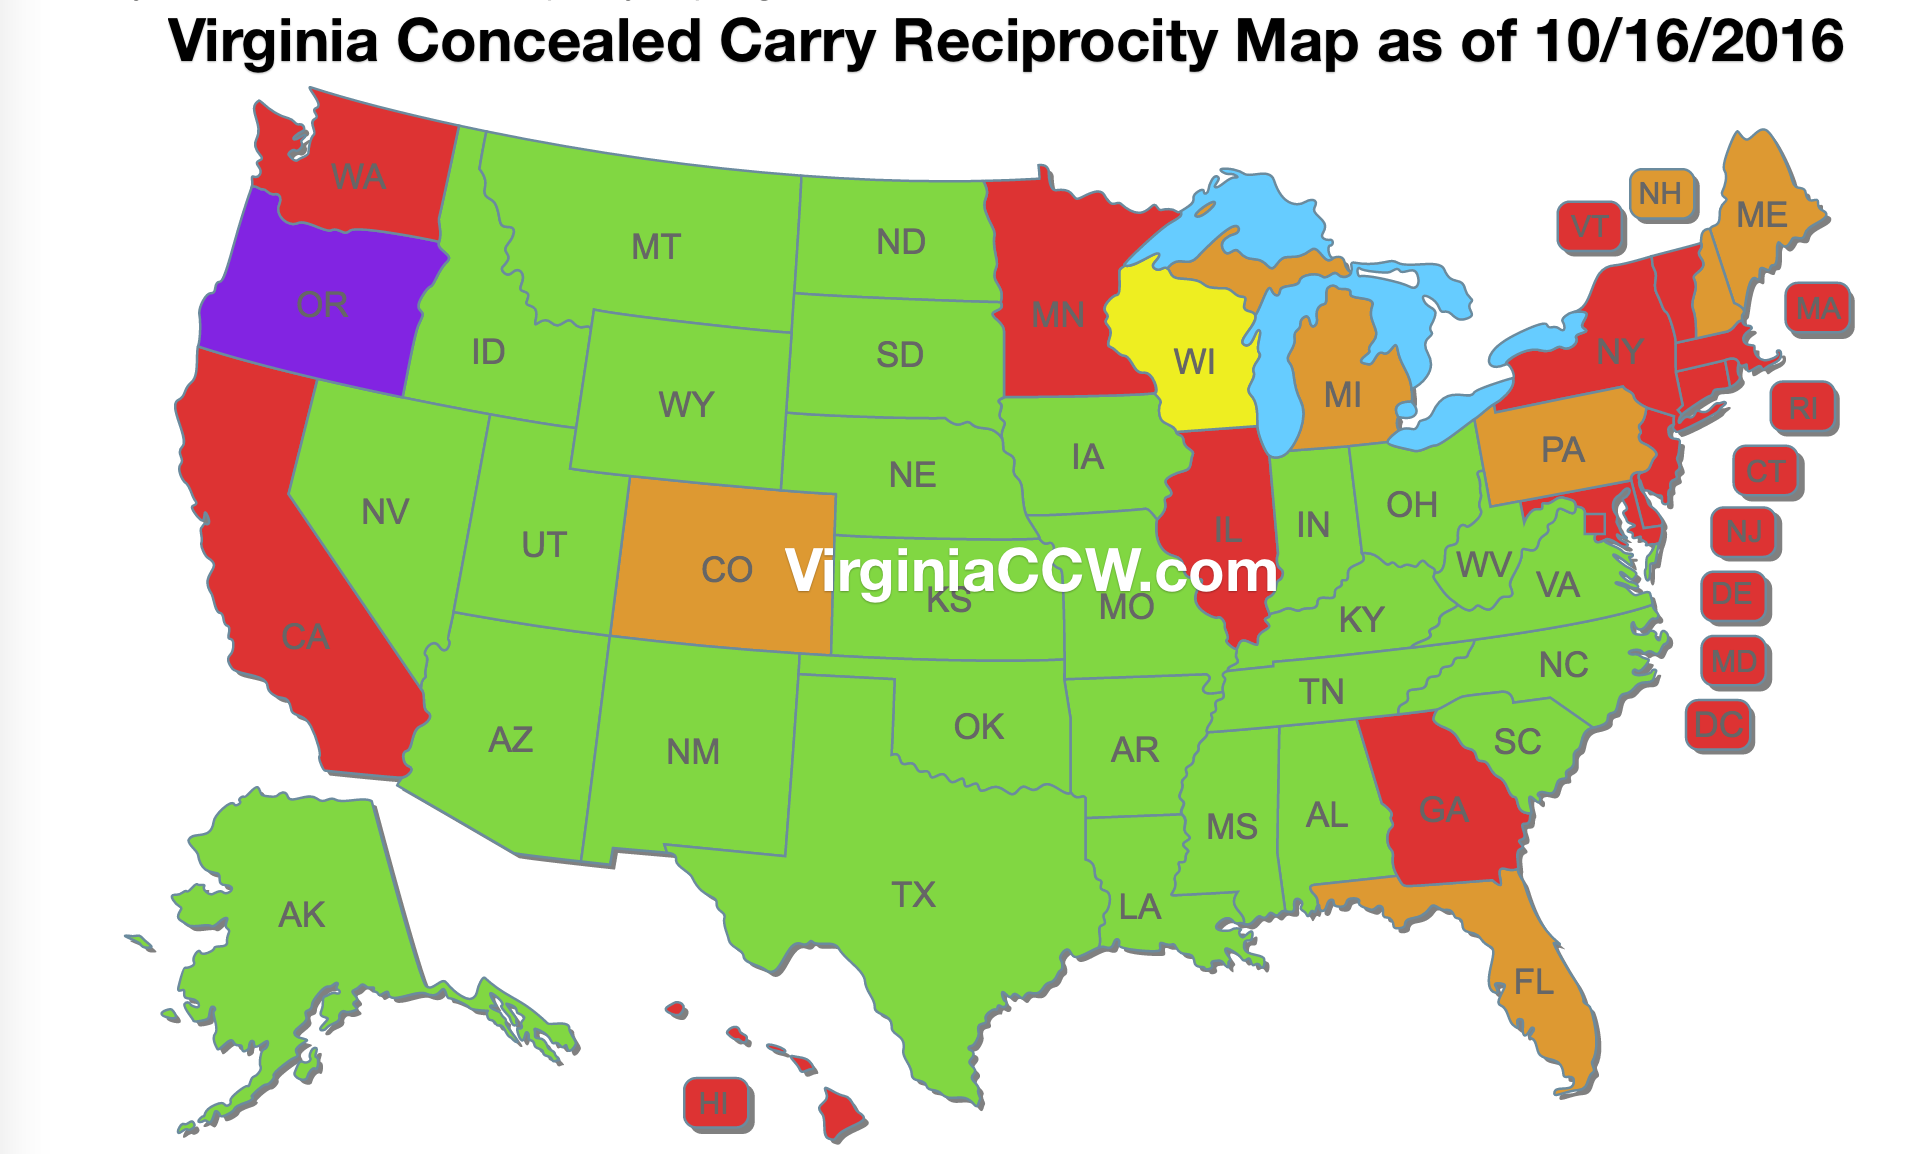 Bet you didn’t know that a Virginia Concealed Carry Permit is valid in 33 states. Just one of the awesome tidbits you learn working at OwnerListens.